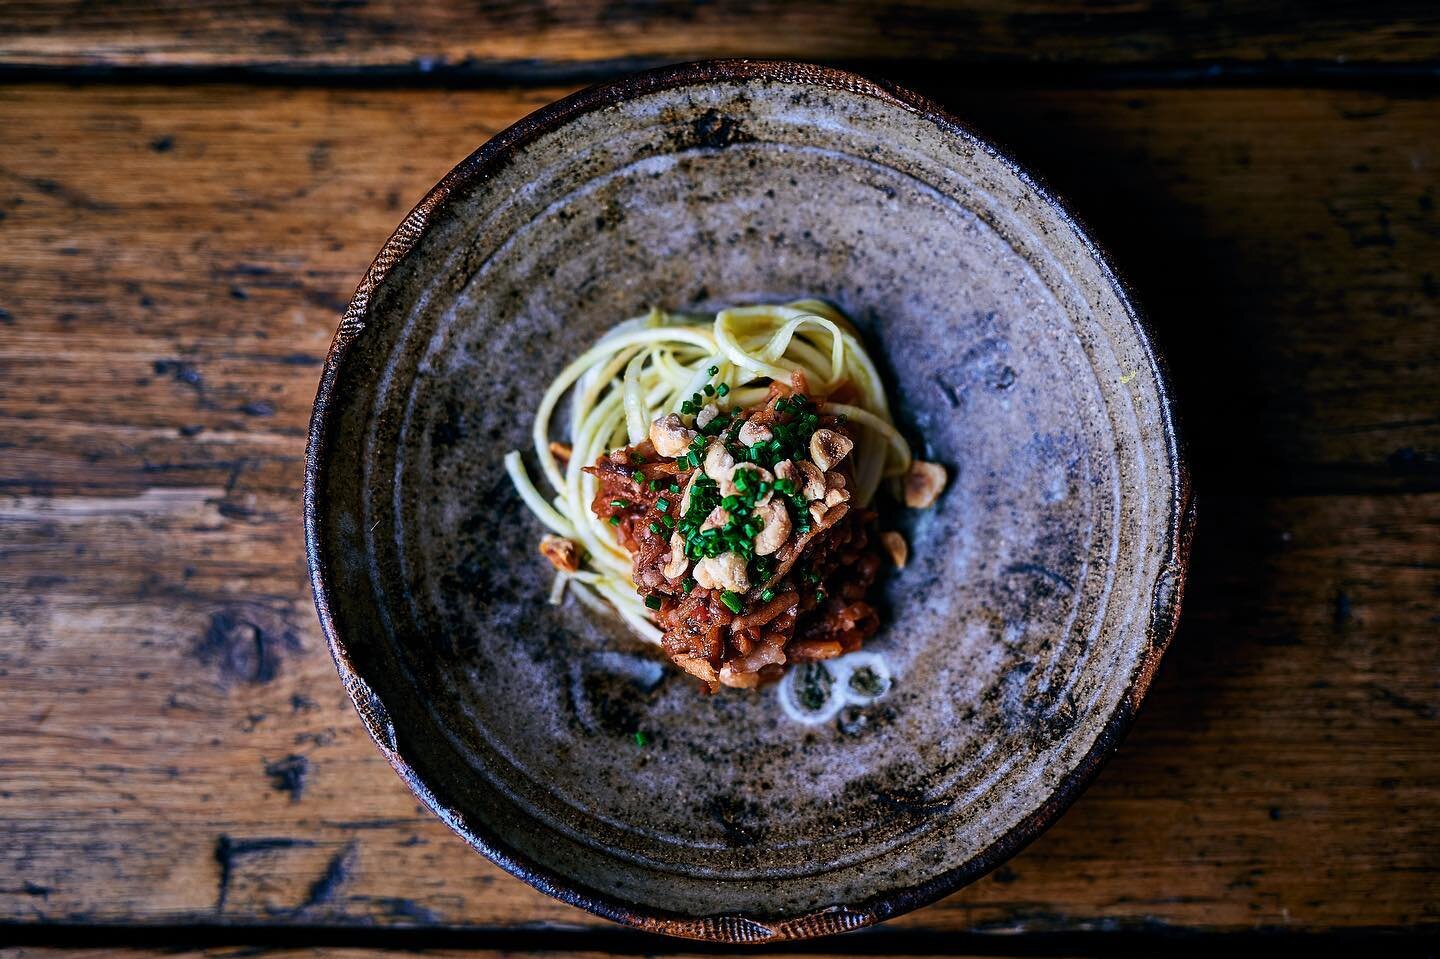 Squid bolognese with celeriac spaghetti 🍝 
😋😋😋
Incredible adaption of a classic by @liaml2590
👨&zwj;🍳👨&zwj;🍳👨&zwj;🍳
If we were to ever re use our dishes this would be one of them for sure. 
👌👌👌
A healthier and more nutrient dense way to 